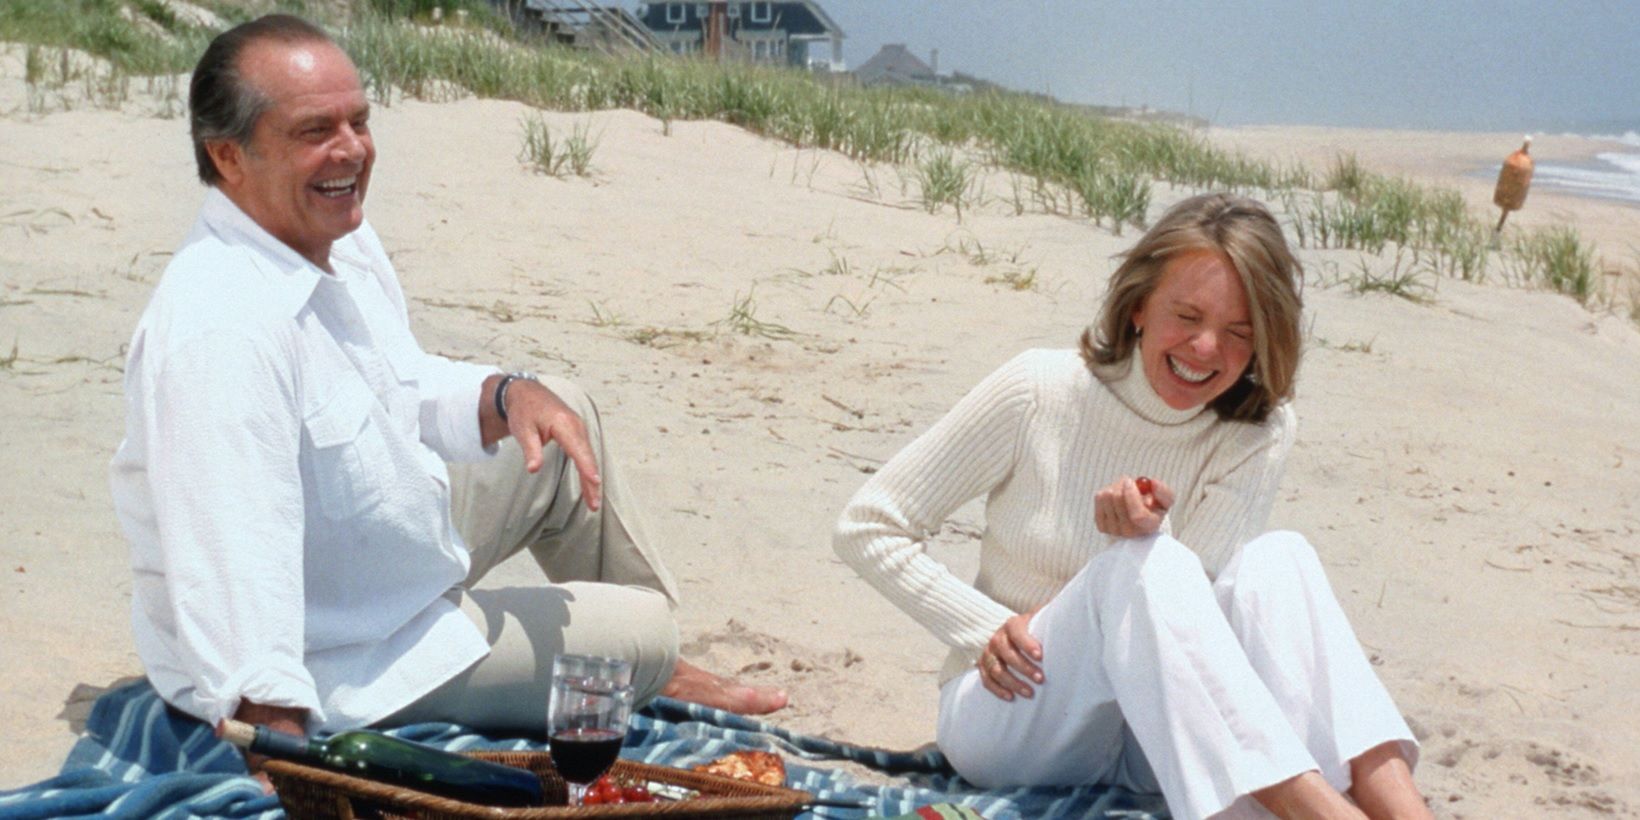 Diane Keaton and Jack Nicholson laughing on the beach in Something's Gotta Give